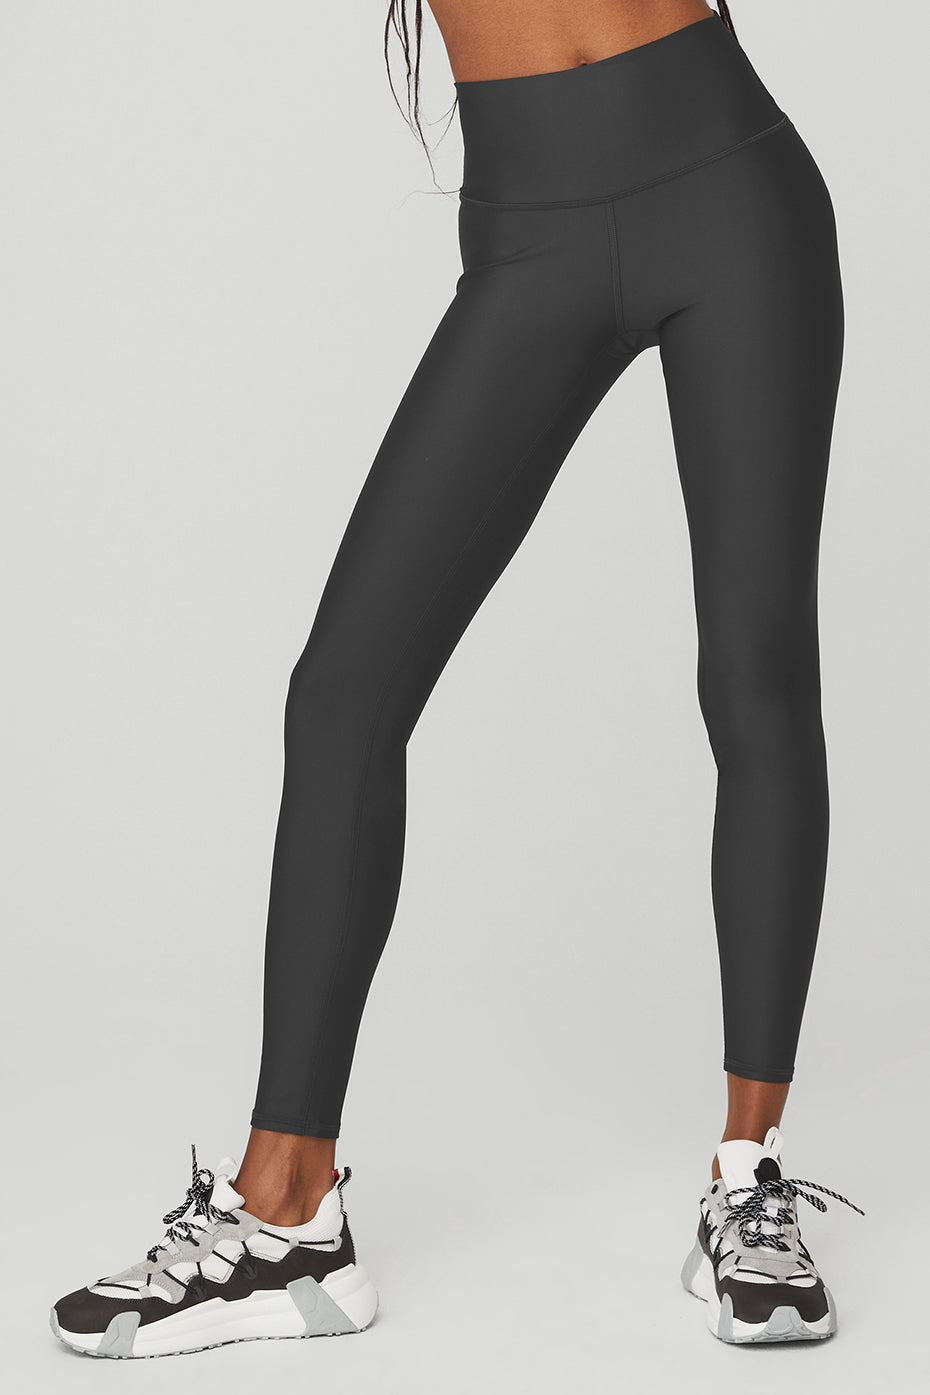 Best Women's Leggings: Top 5 Activewear Pants Most Recommended By